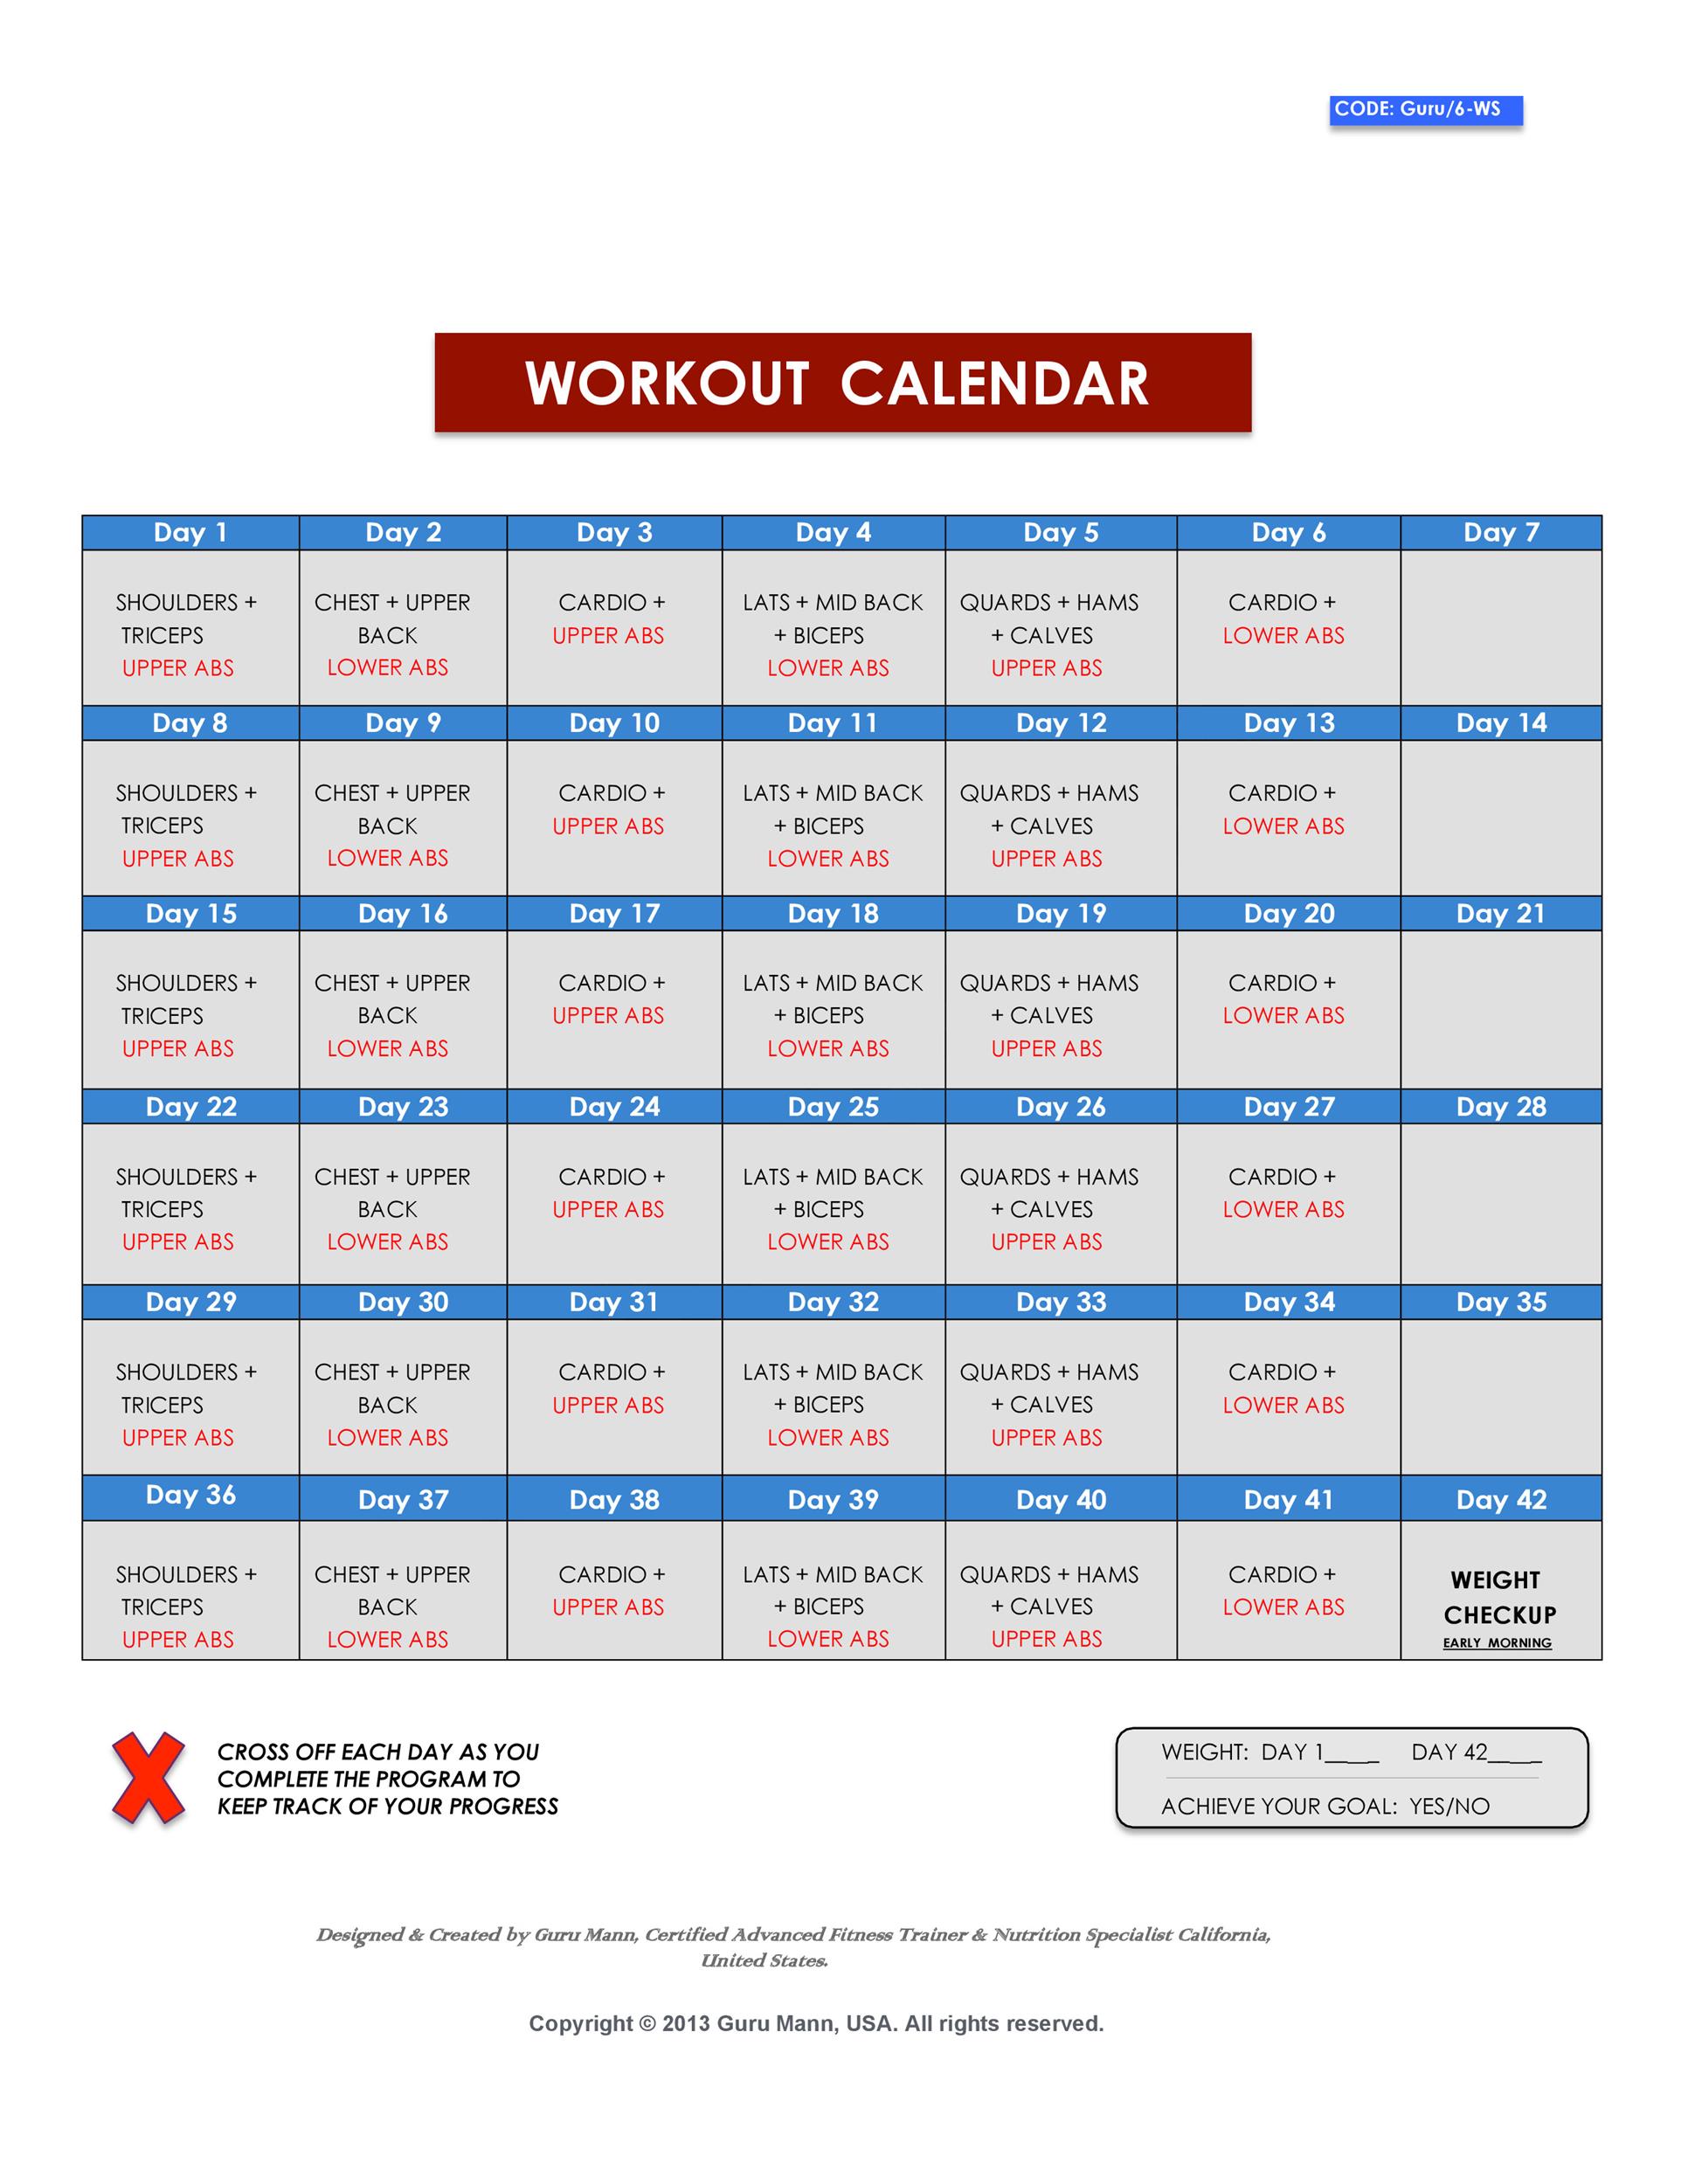 propsed calendar for work outs on excel 3